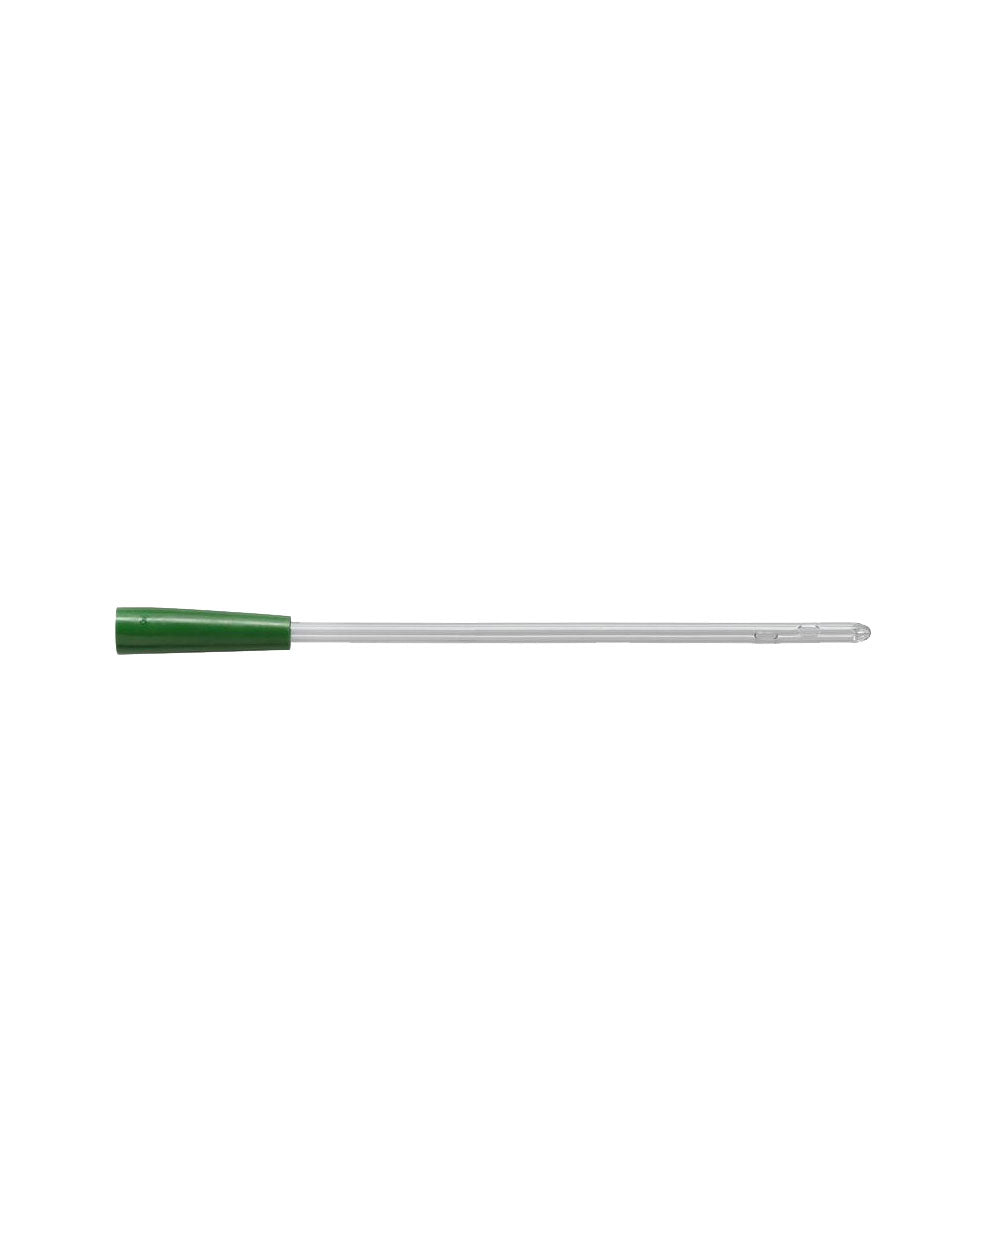 Coloplast Self-Cath Urethral Catheter Male Coude Olive with Guide Stripe 808  8FR 16" (40cm) - 30 Per Box